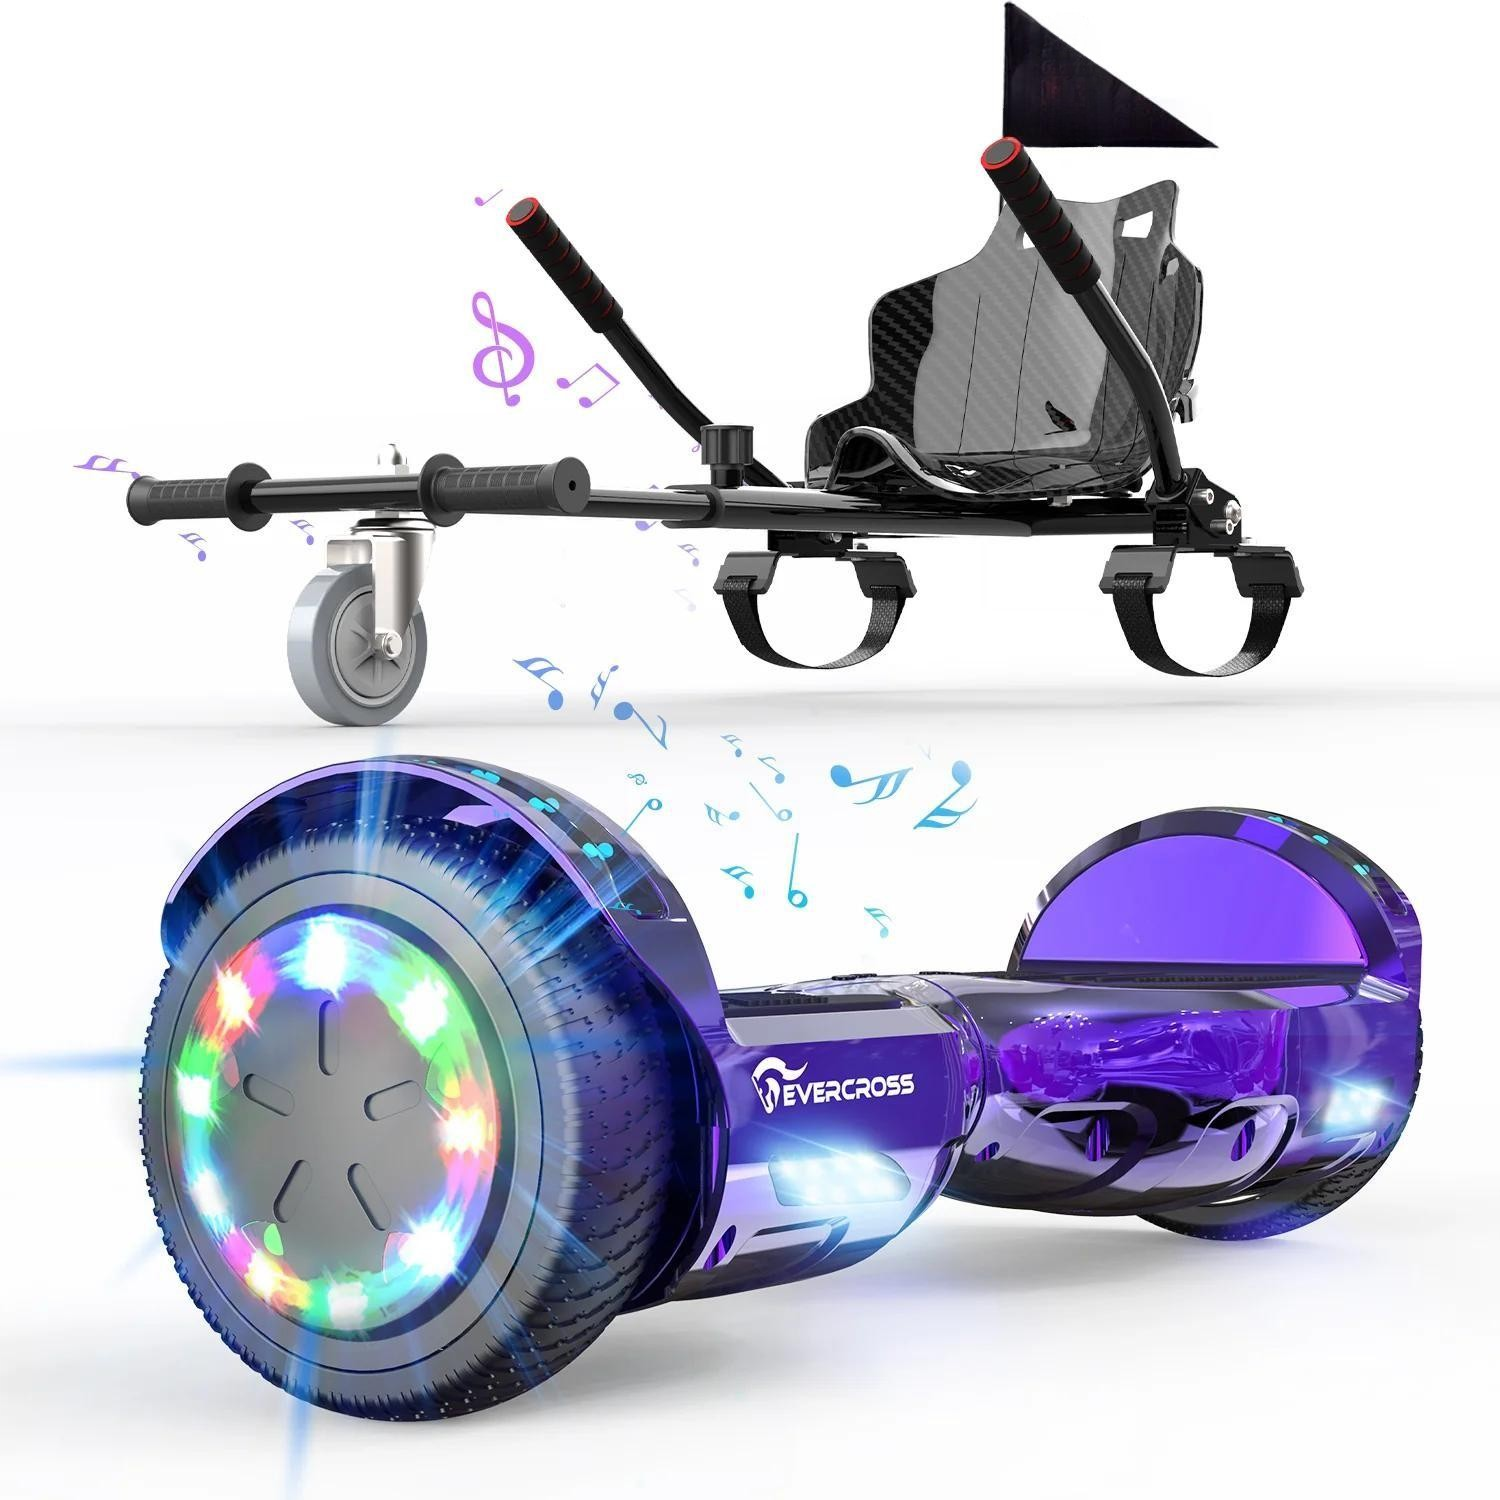 EVERCROSS Hoverboard, Self Balancing Scooter 6.5 with Seat